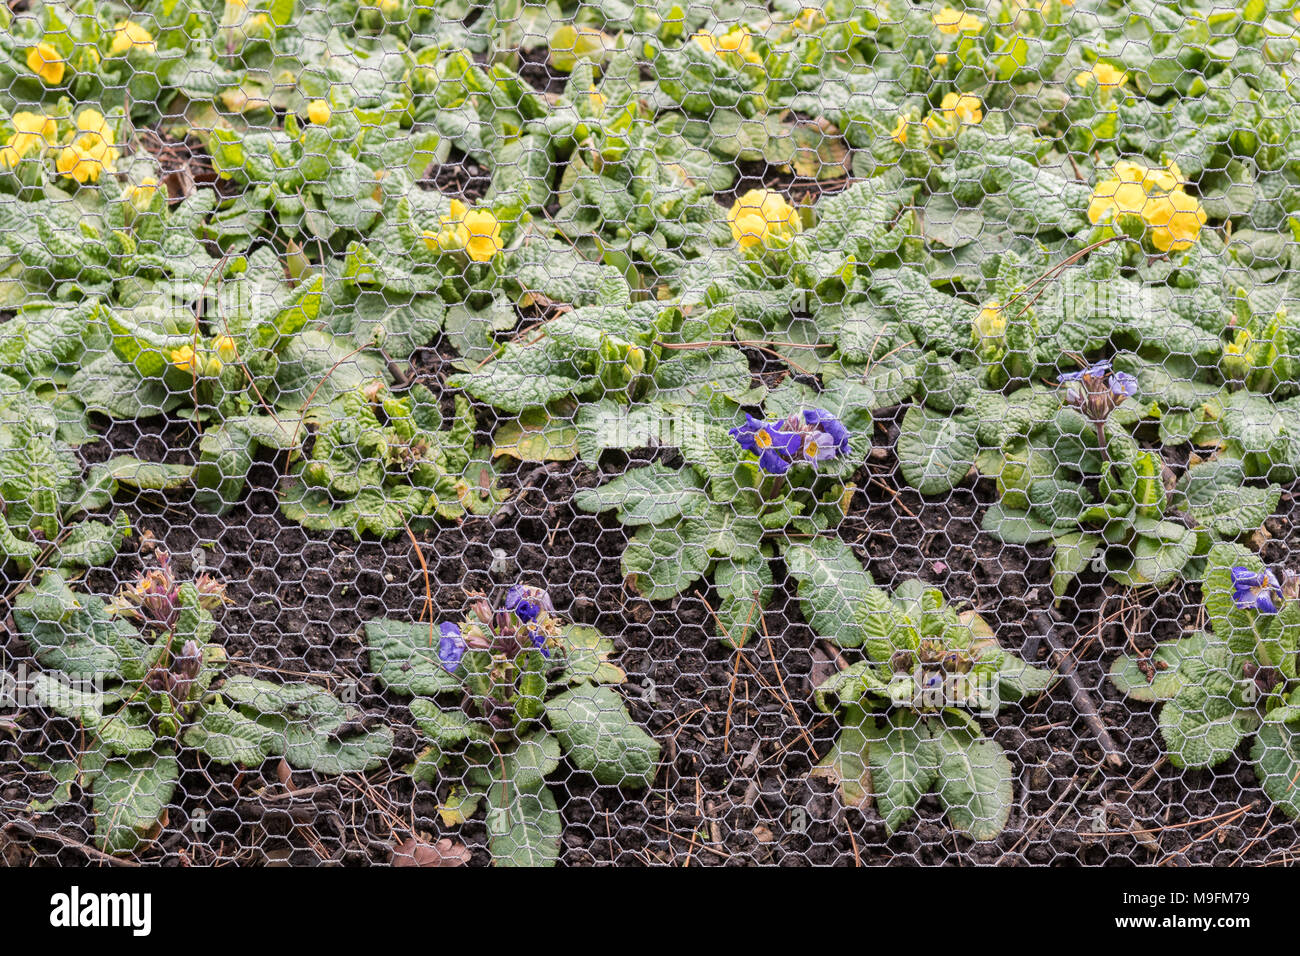 wire mesh chicken wire protecting bedding plants from rabbits Stock Photo